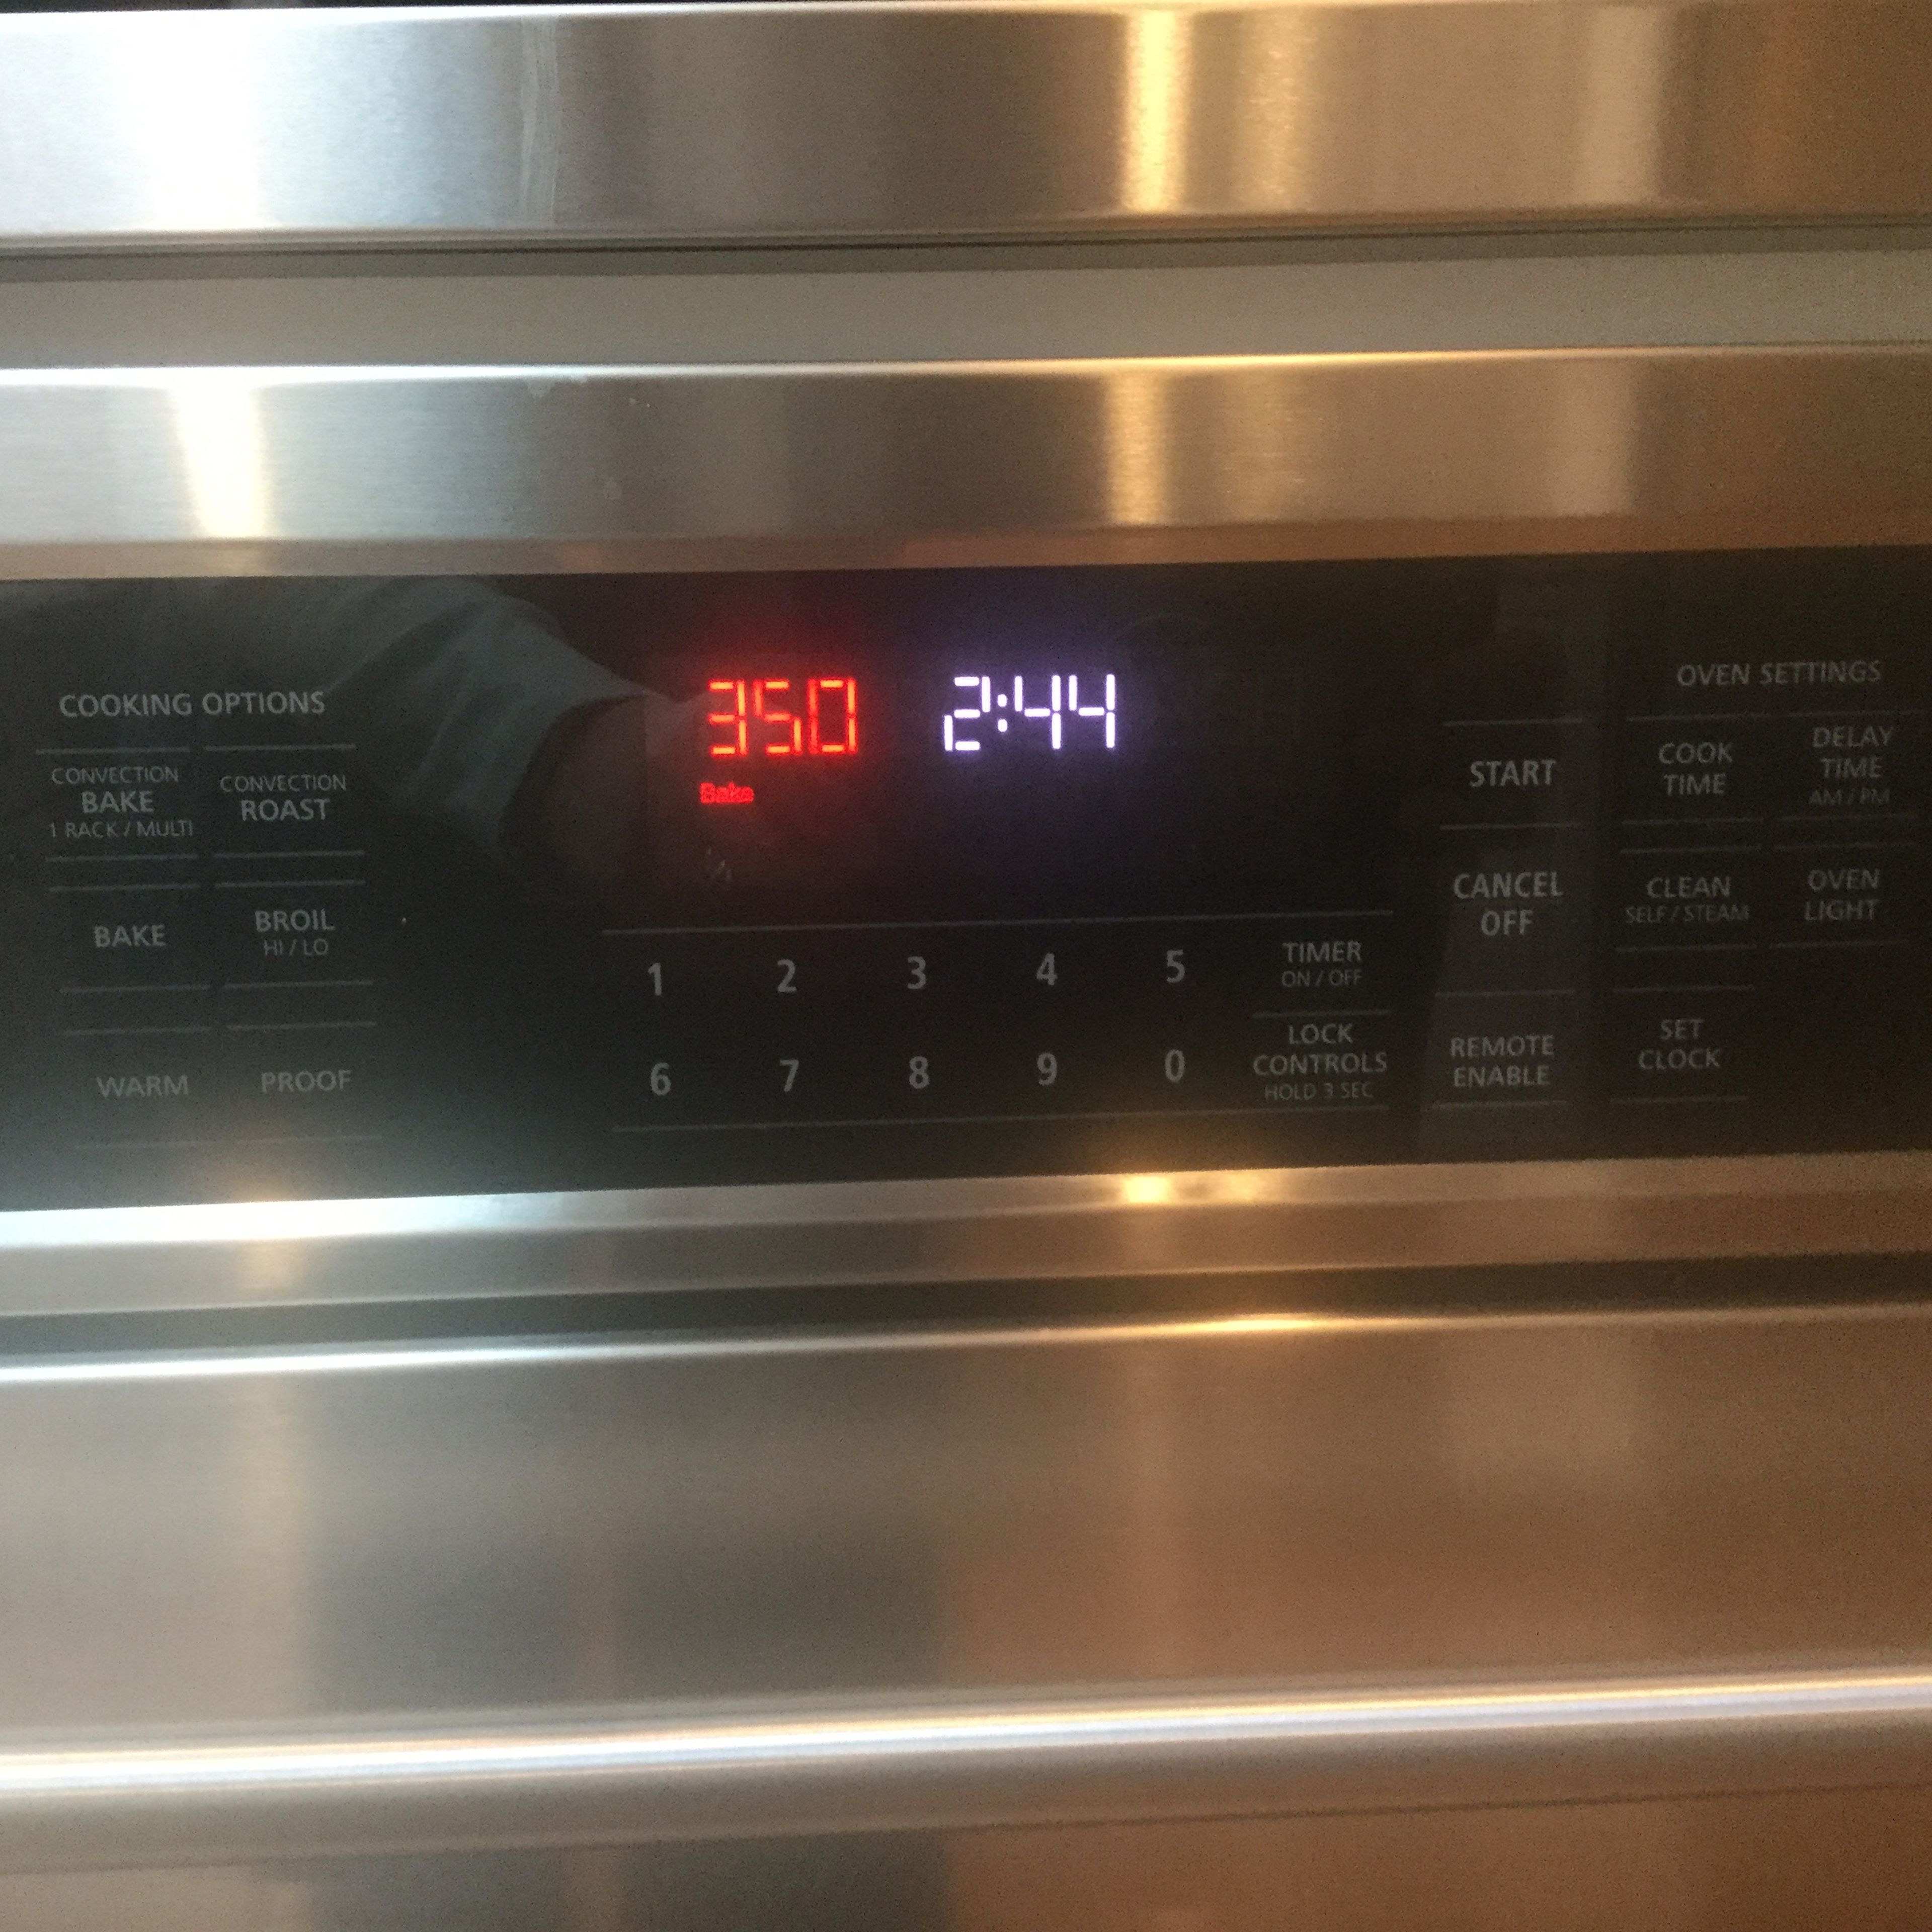 After the dough has chilled, preheat the oven to 350 degrees.